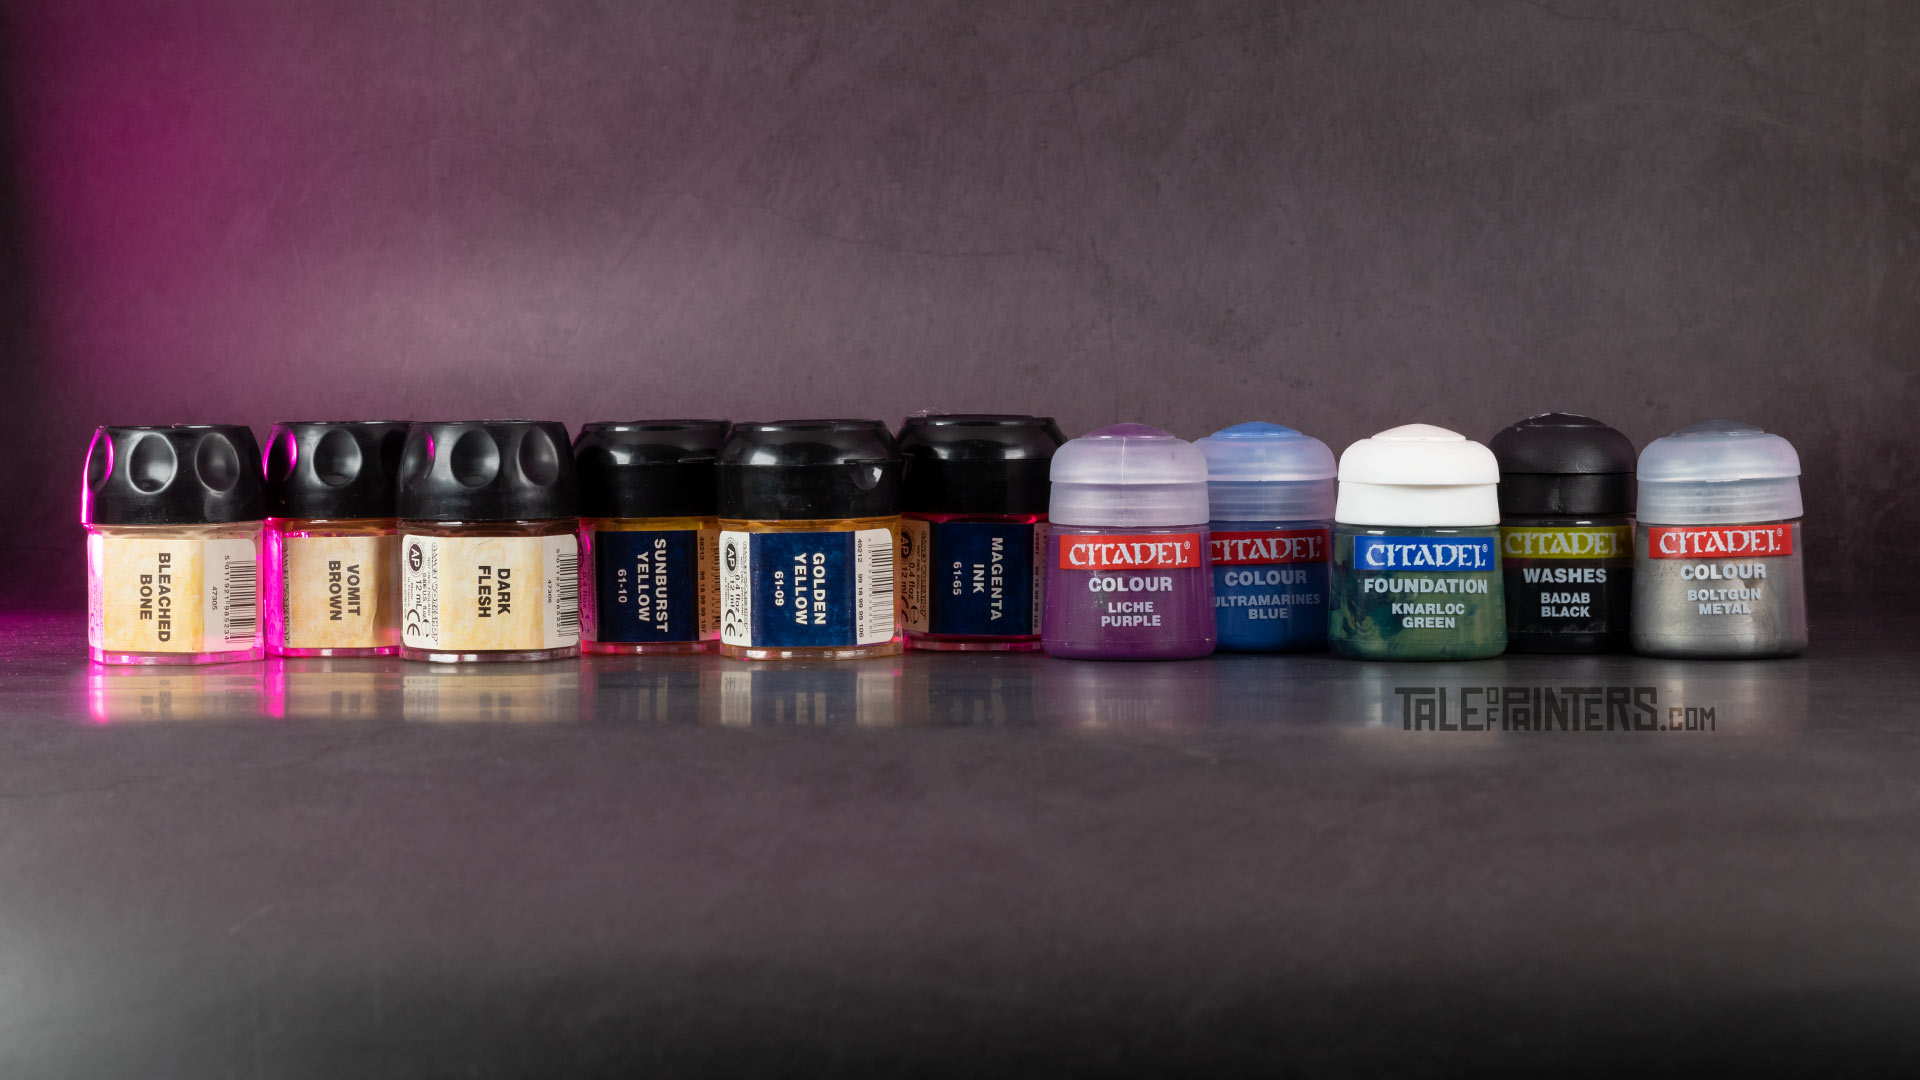 A variety of paint pots from the Citadel Colour 1998 - 2012 range